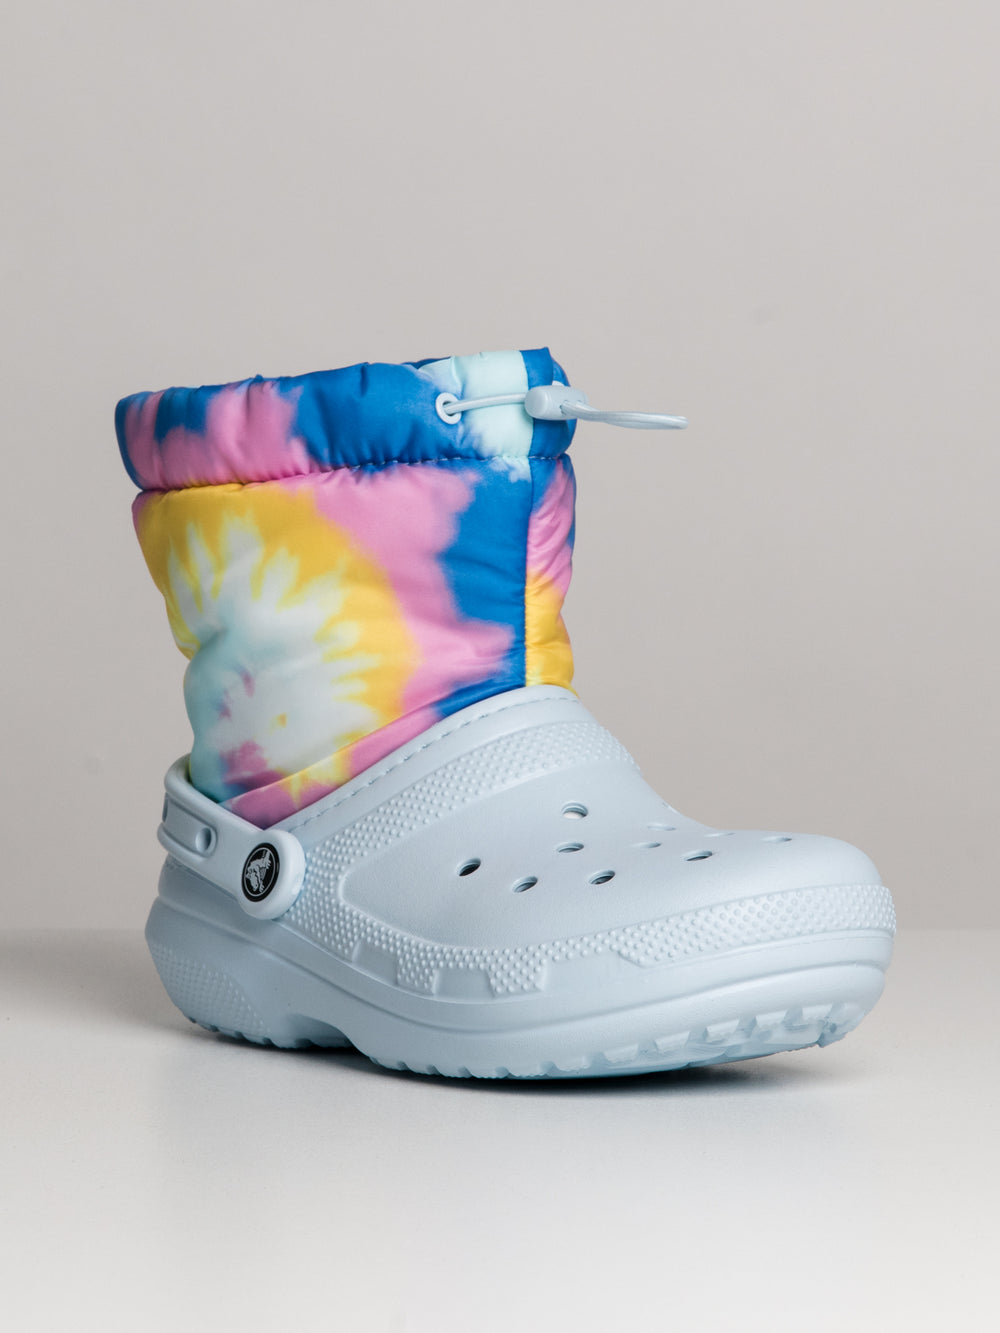 WOMENS CROCS CLASSIC LINED NEO PUFF TIE DYE BOOT - CLEARANCE